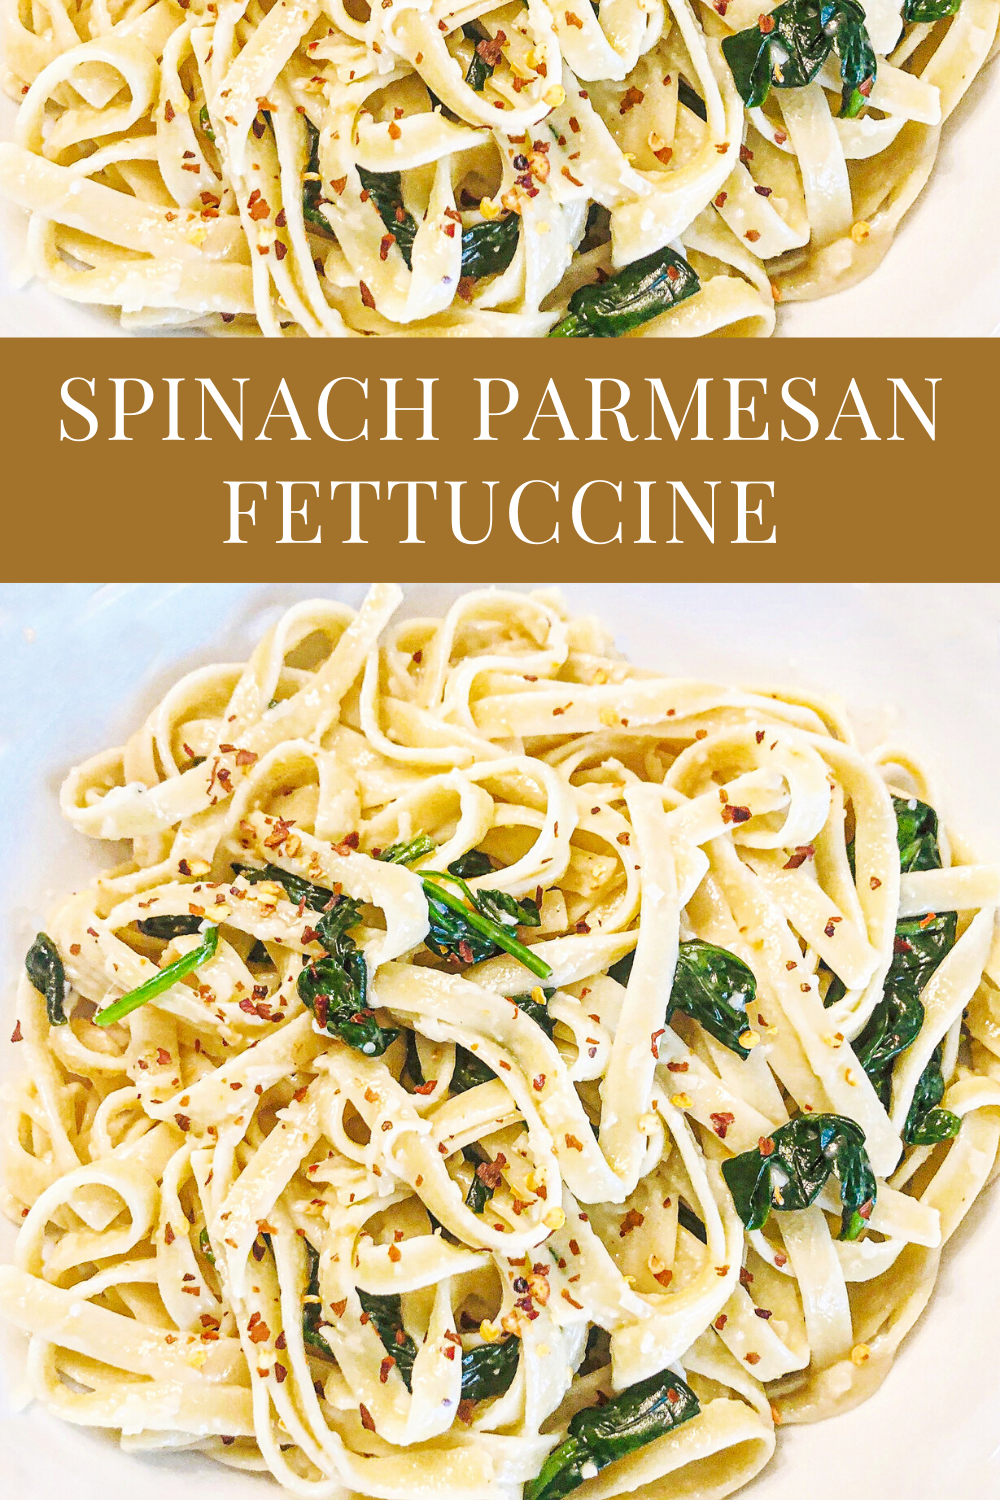 Vegan Spinach Parmesan Fettuccine - Just 5 ingredients! Vegan spinach parmesan fettuccine is a favorite go-to meal when we're short on time or crave the simplicity of an easy, no-fuss dinner. | thiswifecooks.com

#spinachfettuccinerecipes #veganpastarecipes #veganfettuccine #thiswifecooksrecipes #veganquarantinerecipes #easypastarecipes #30minutepastarecipe #5ingredientmeals via @thiswifecooks